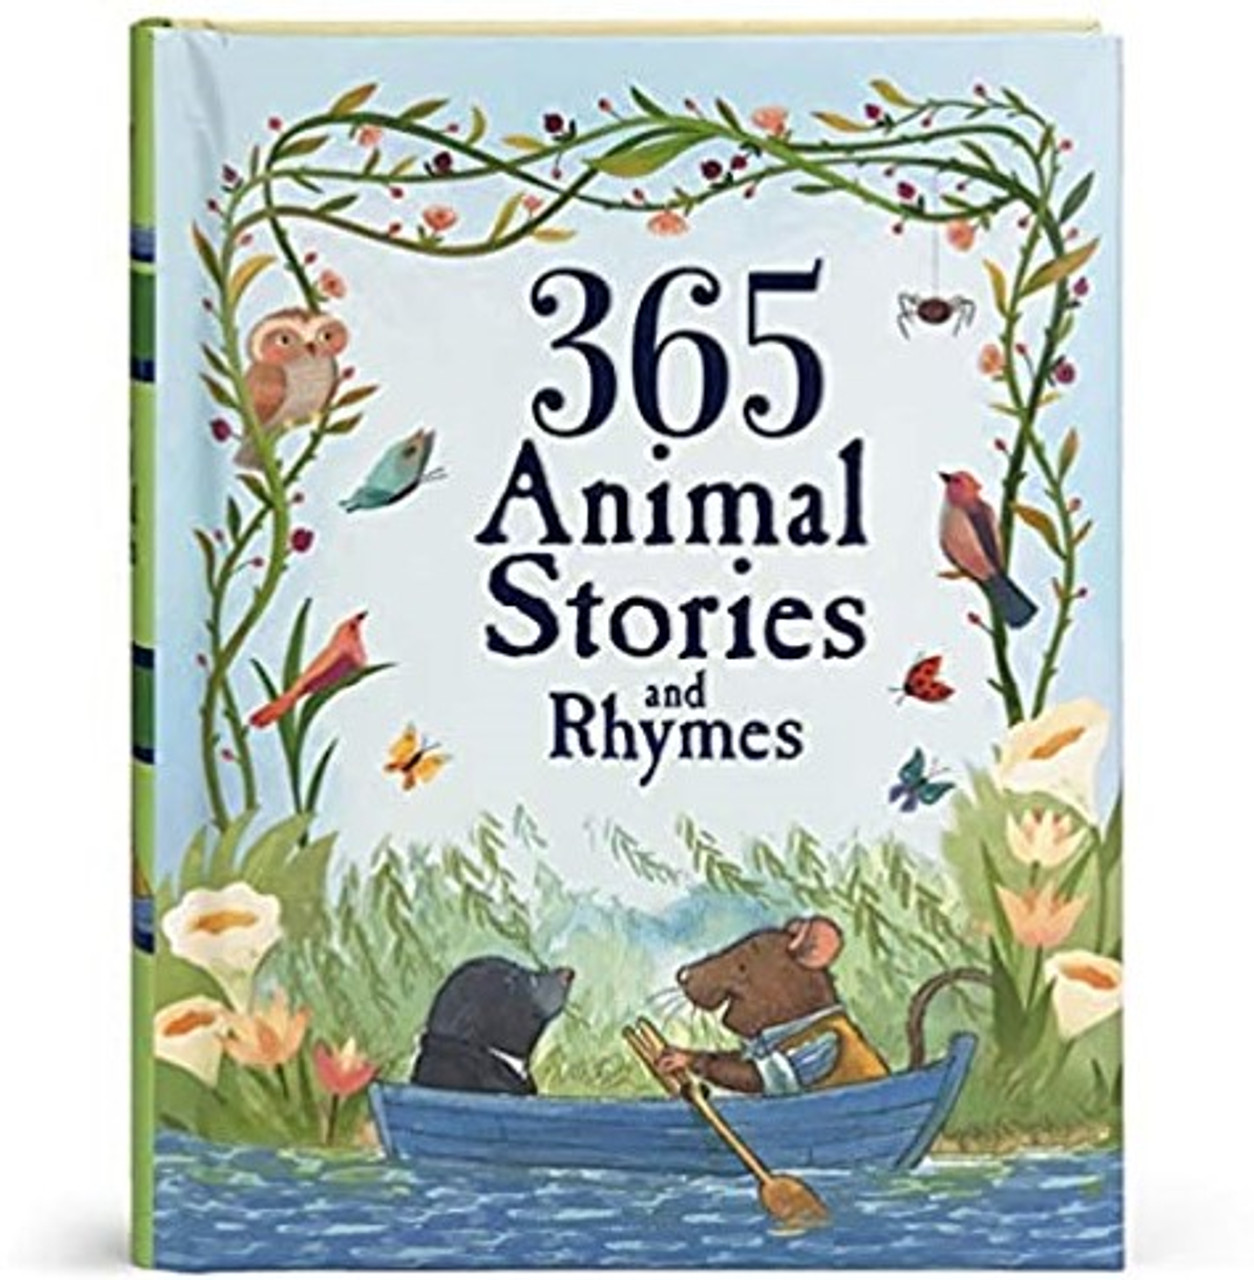 365 Animal Stories and Rhymes - Adirondack Country Store